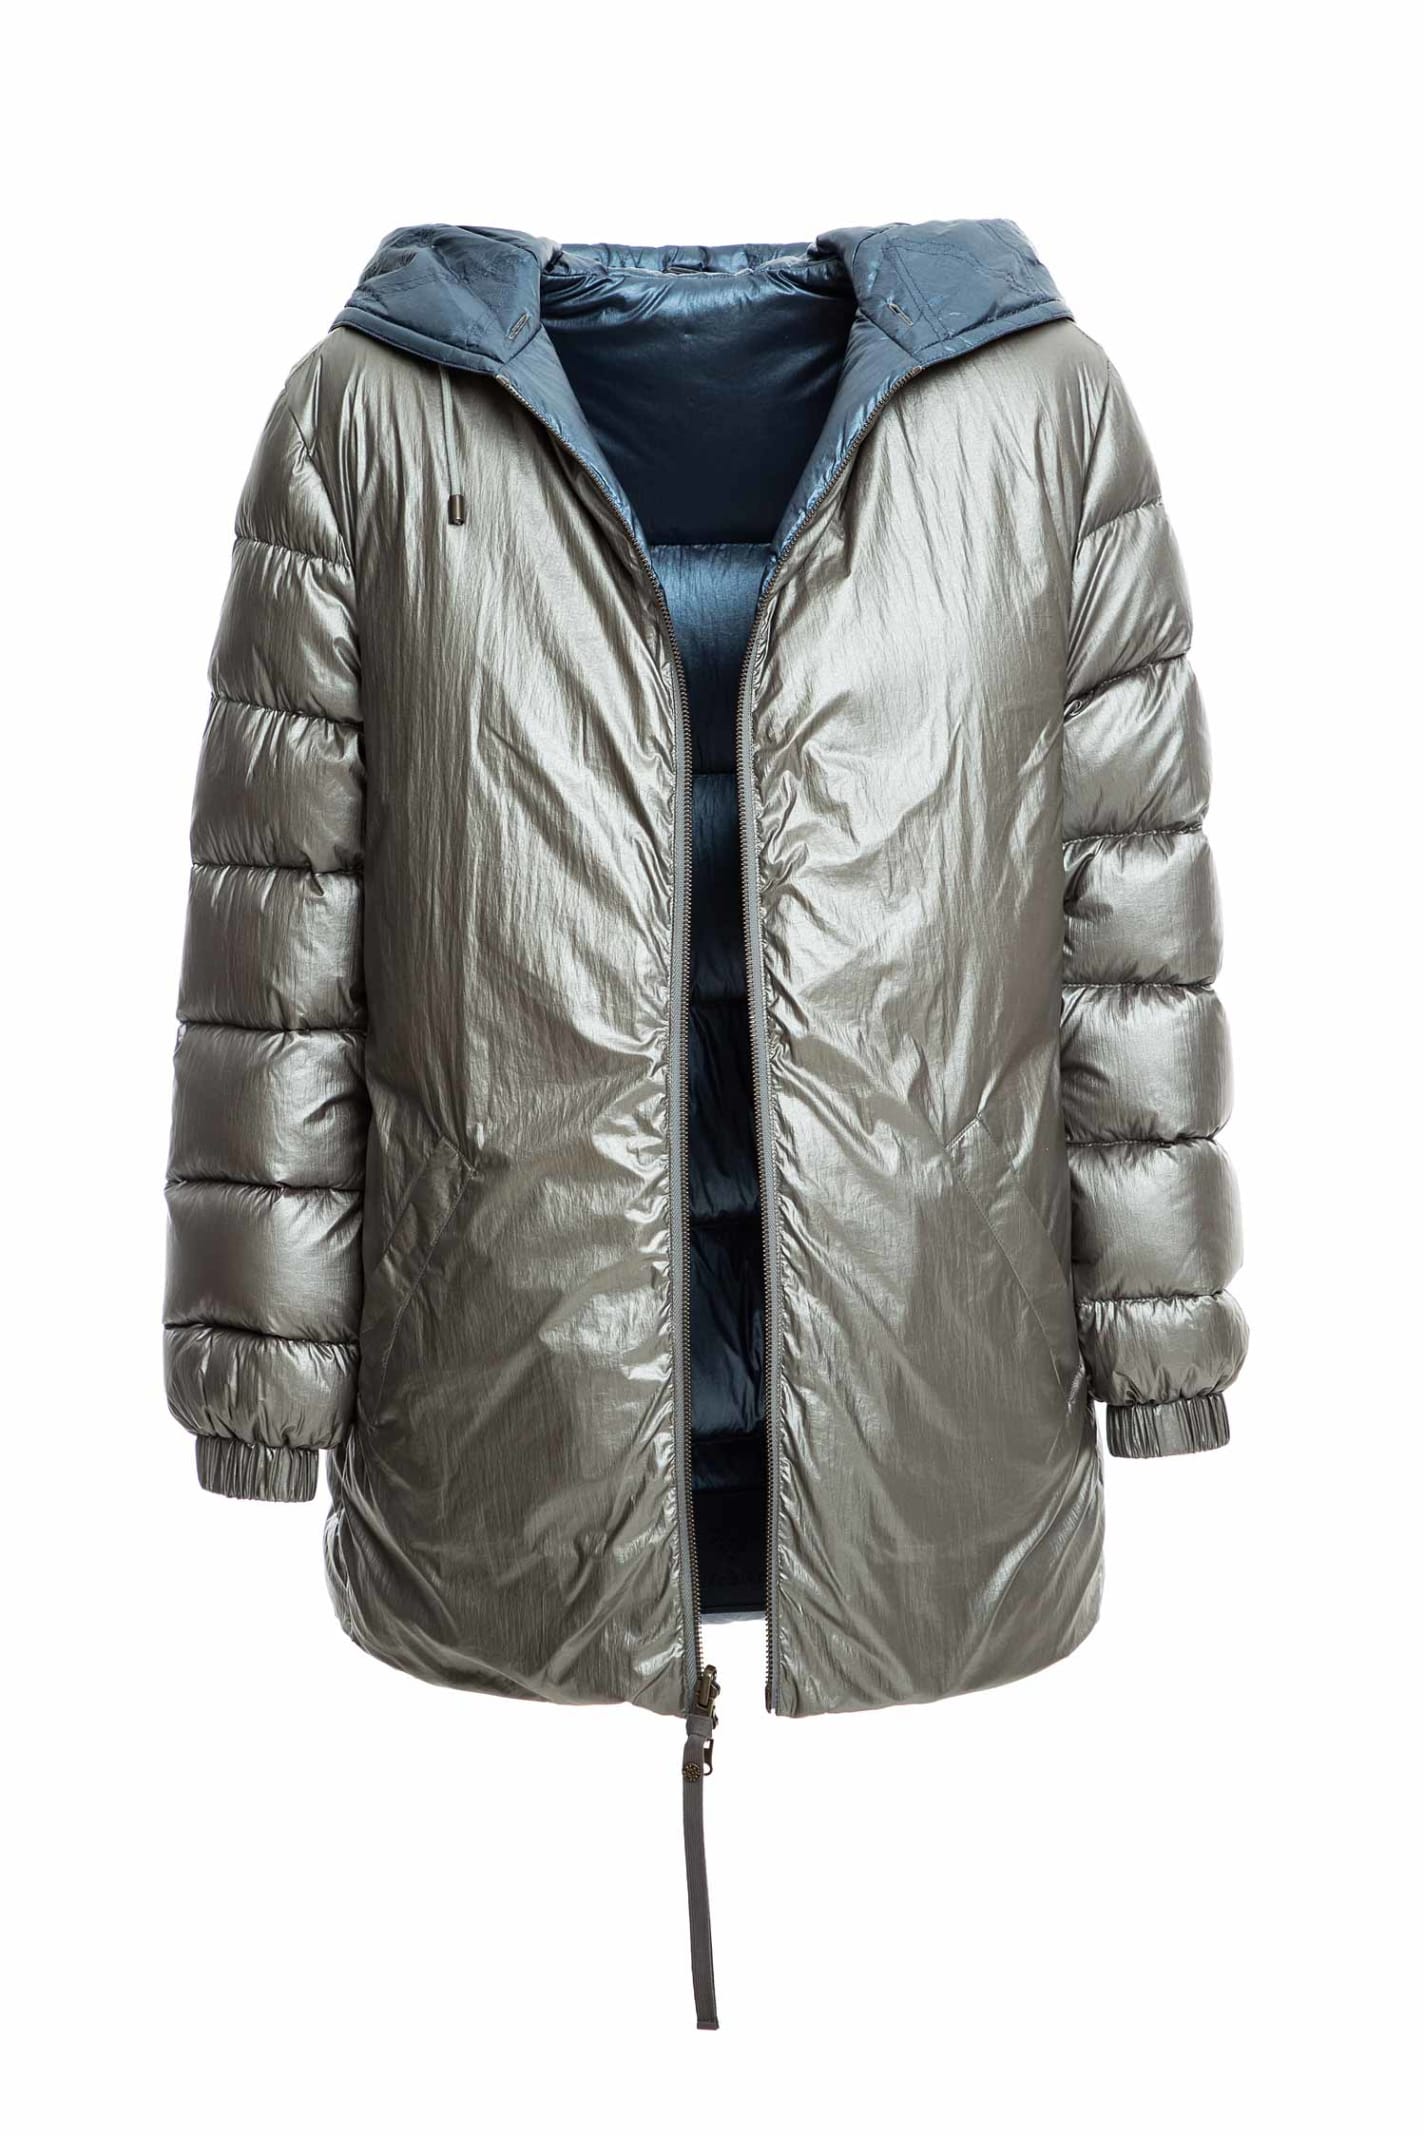 Mr & Mrs Italy Reversible Down Jacket